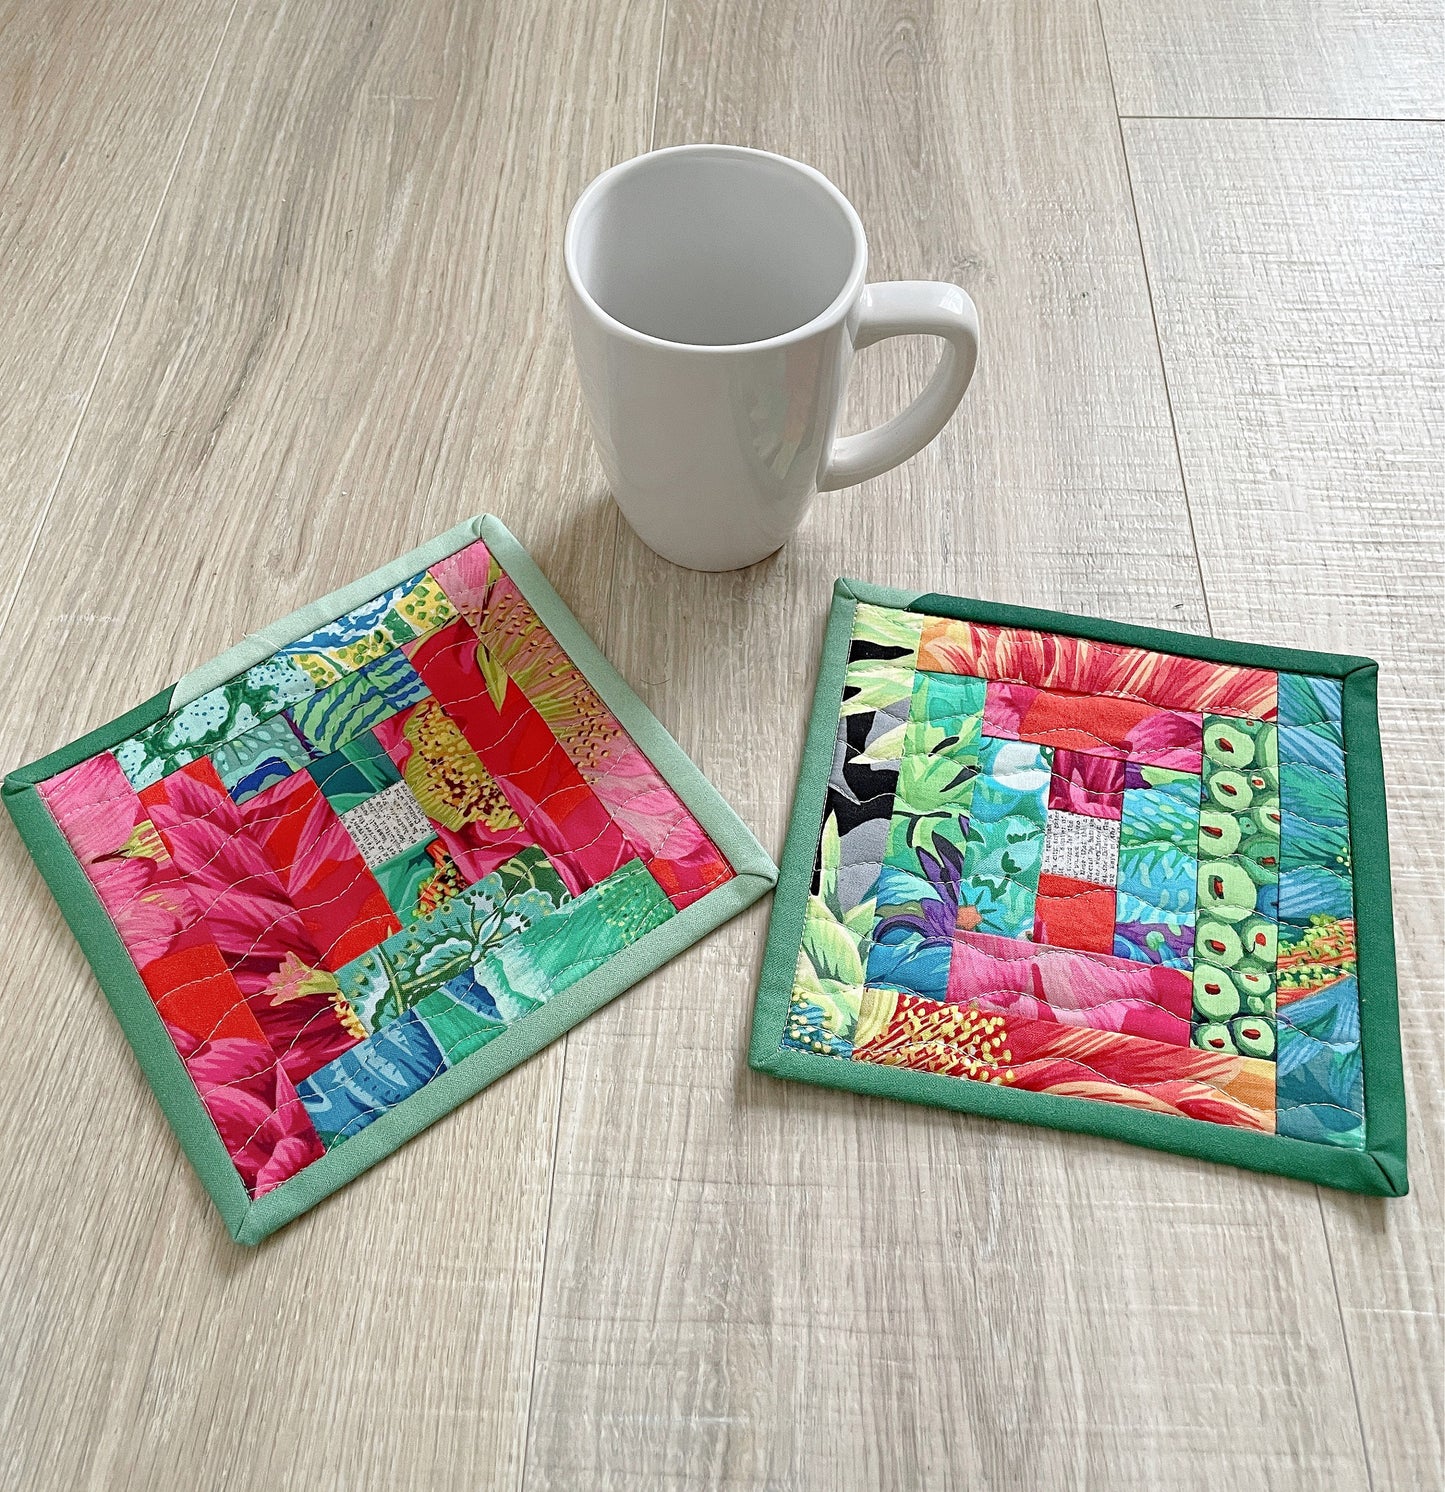 set of two brightly colored fabric mug rugs in pink and green.